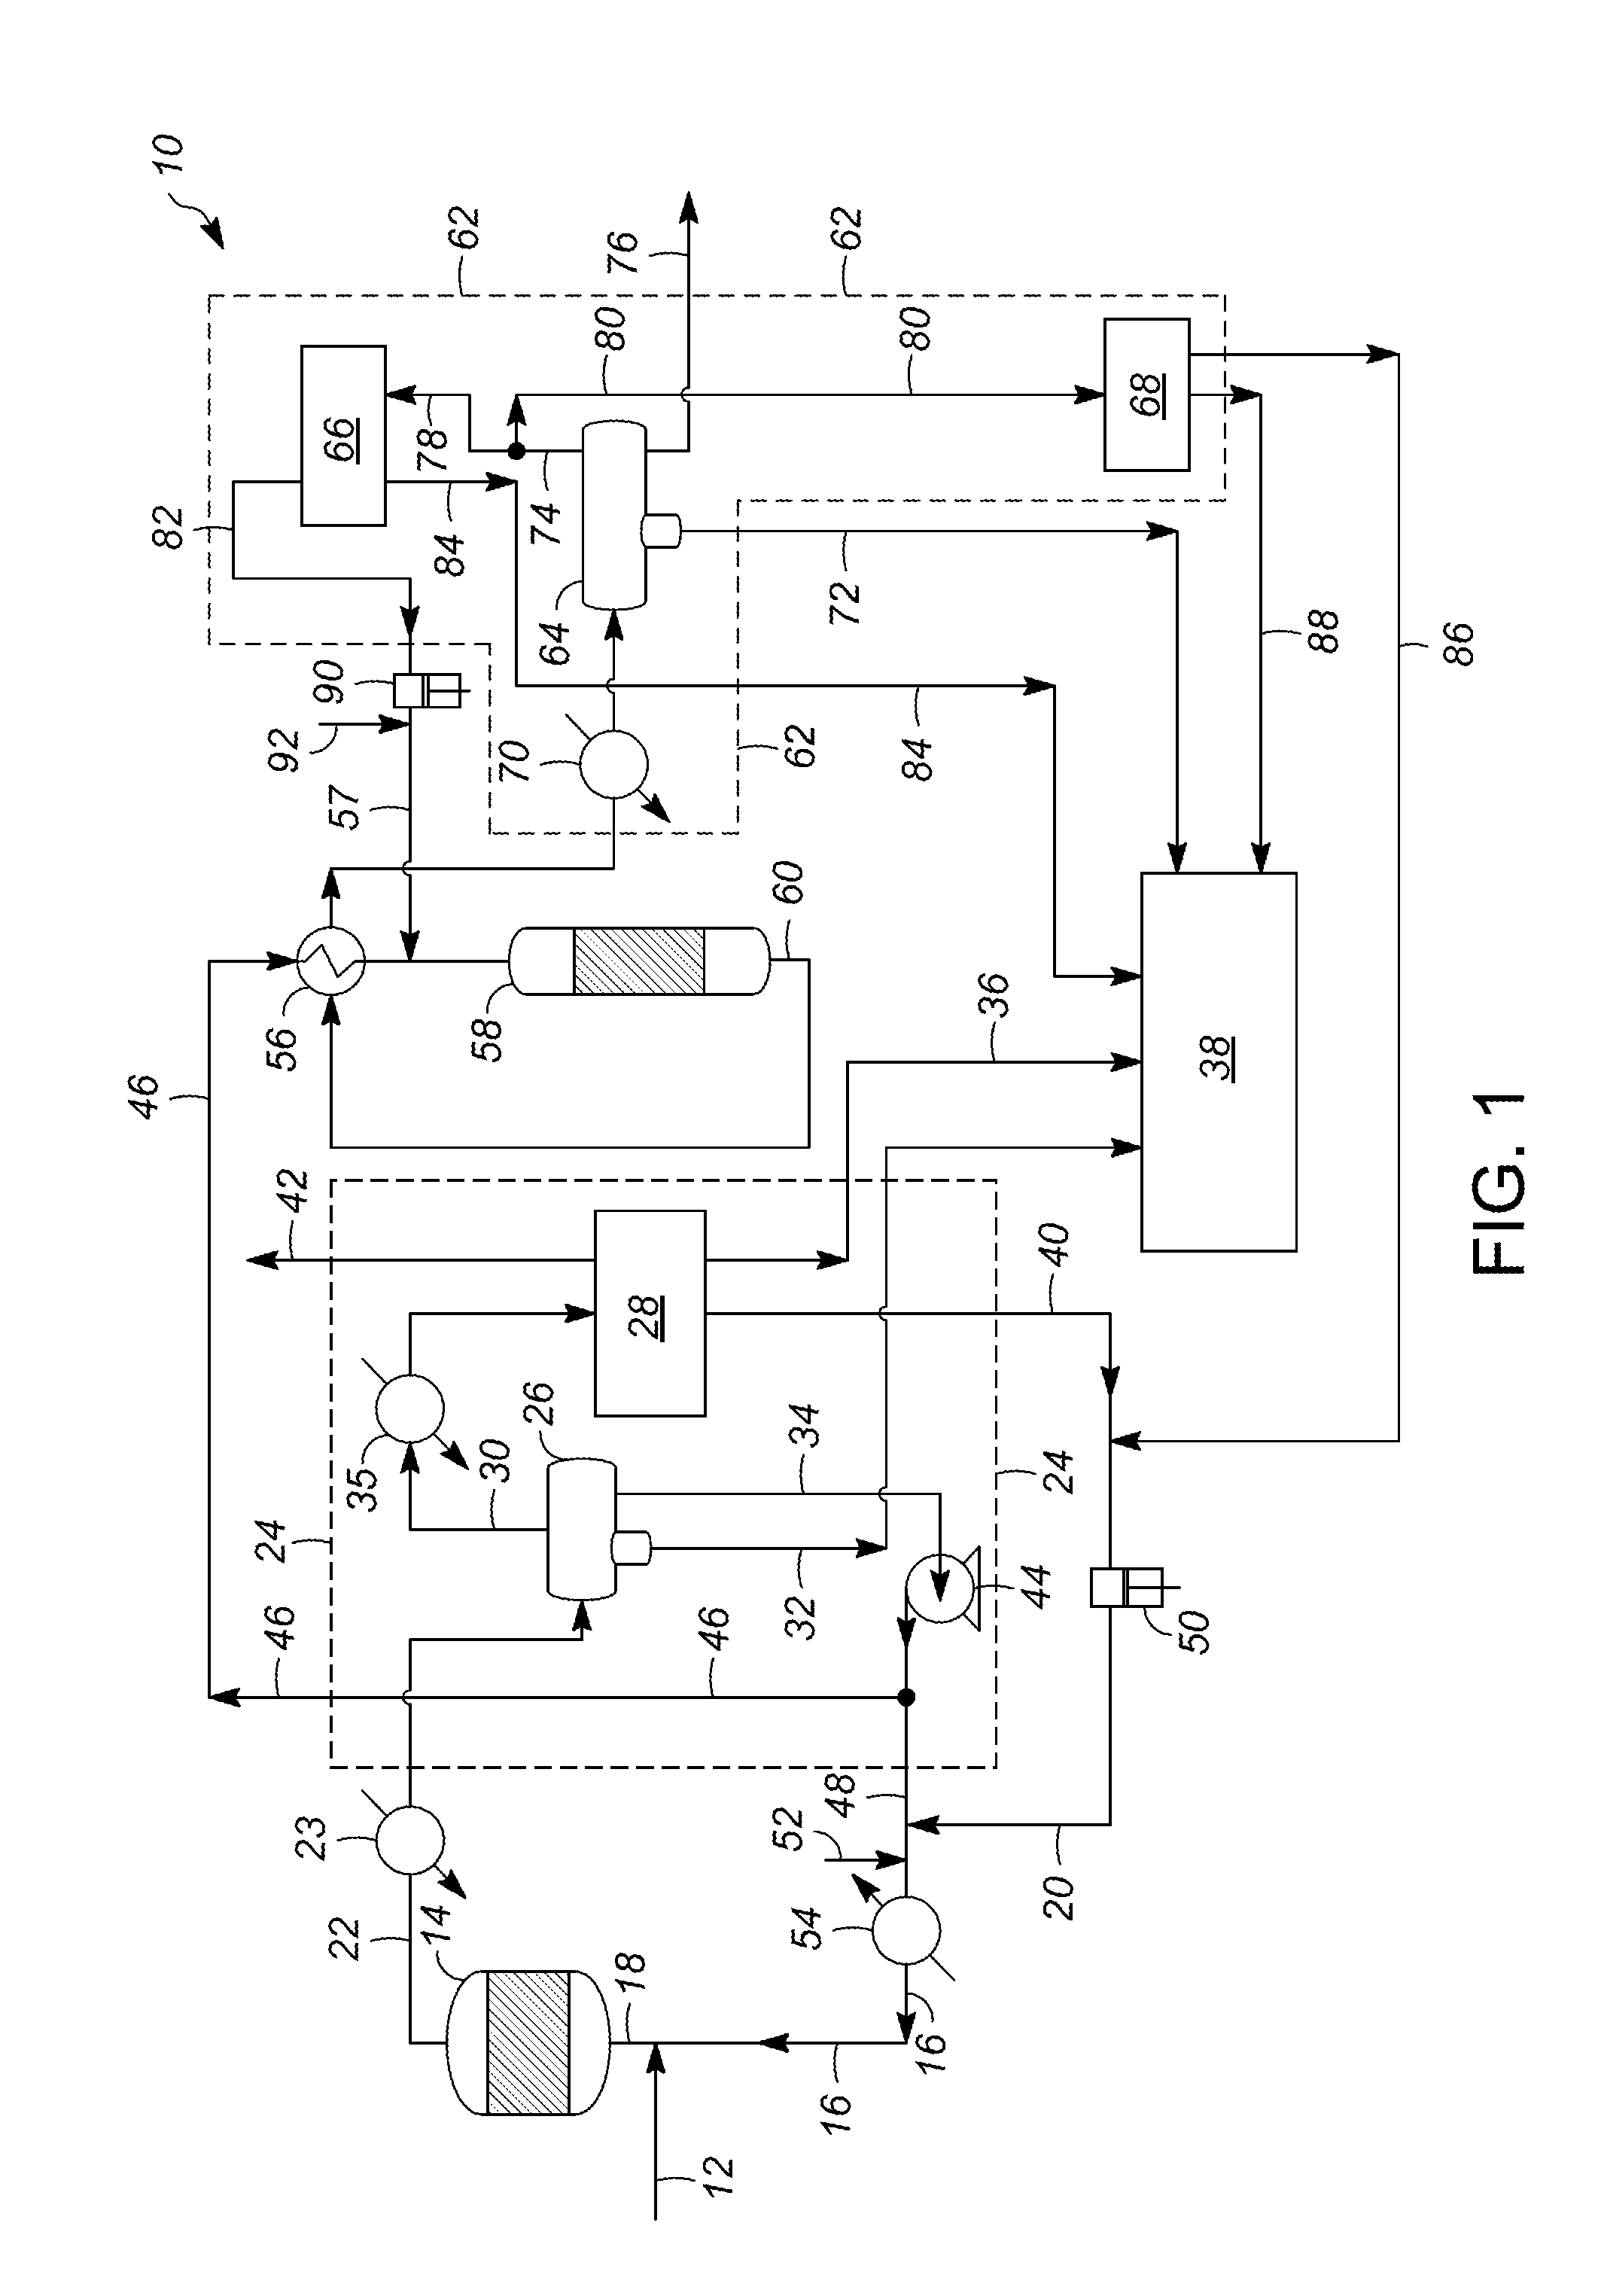 Methods for deoxygenating biomass-derived pyrolysis oil